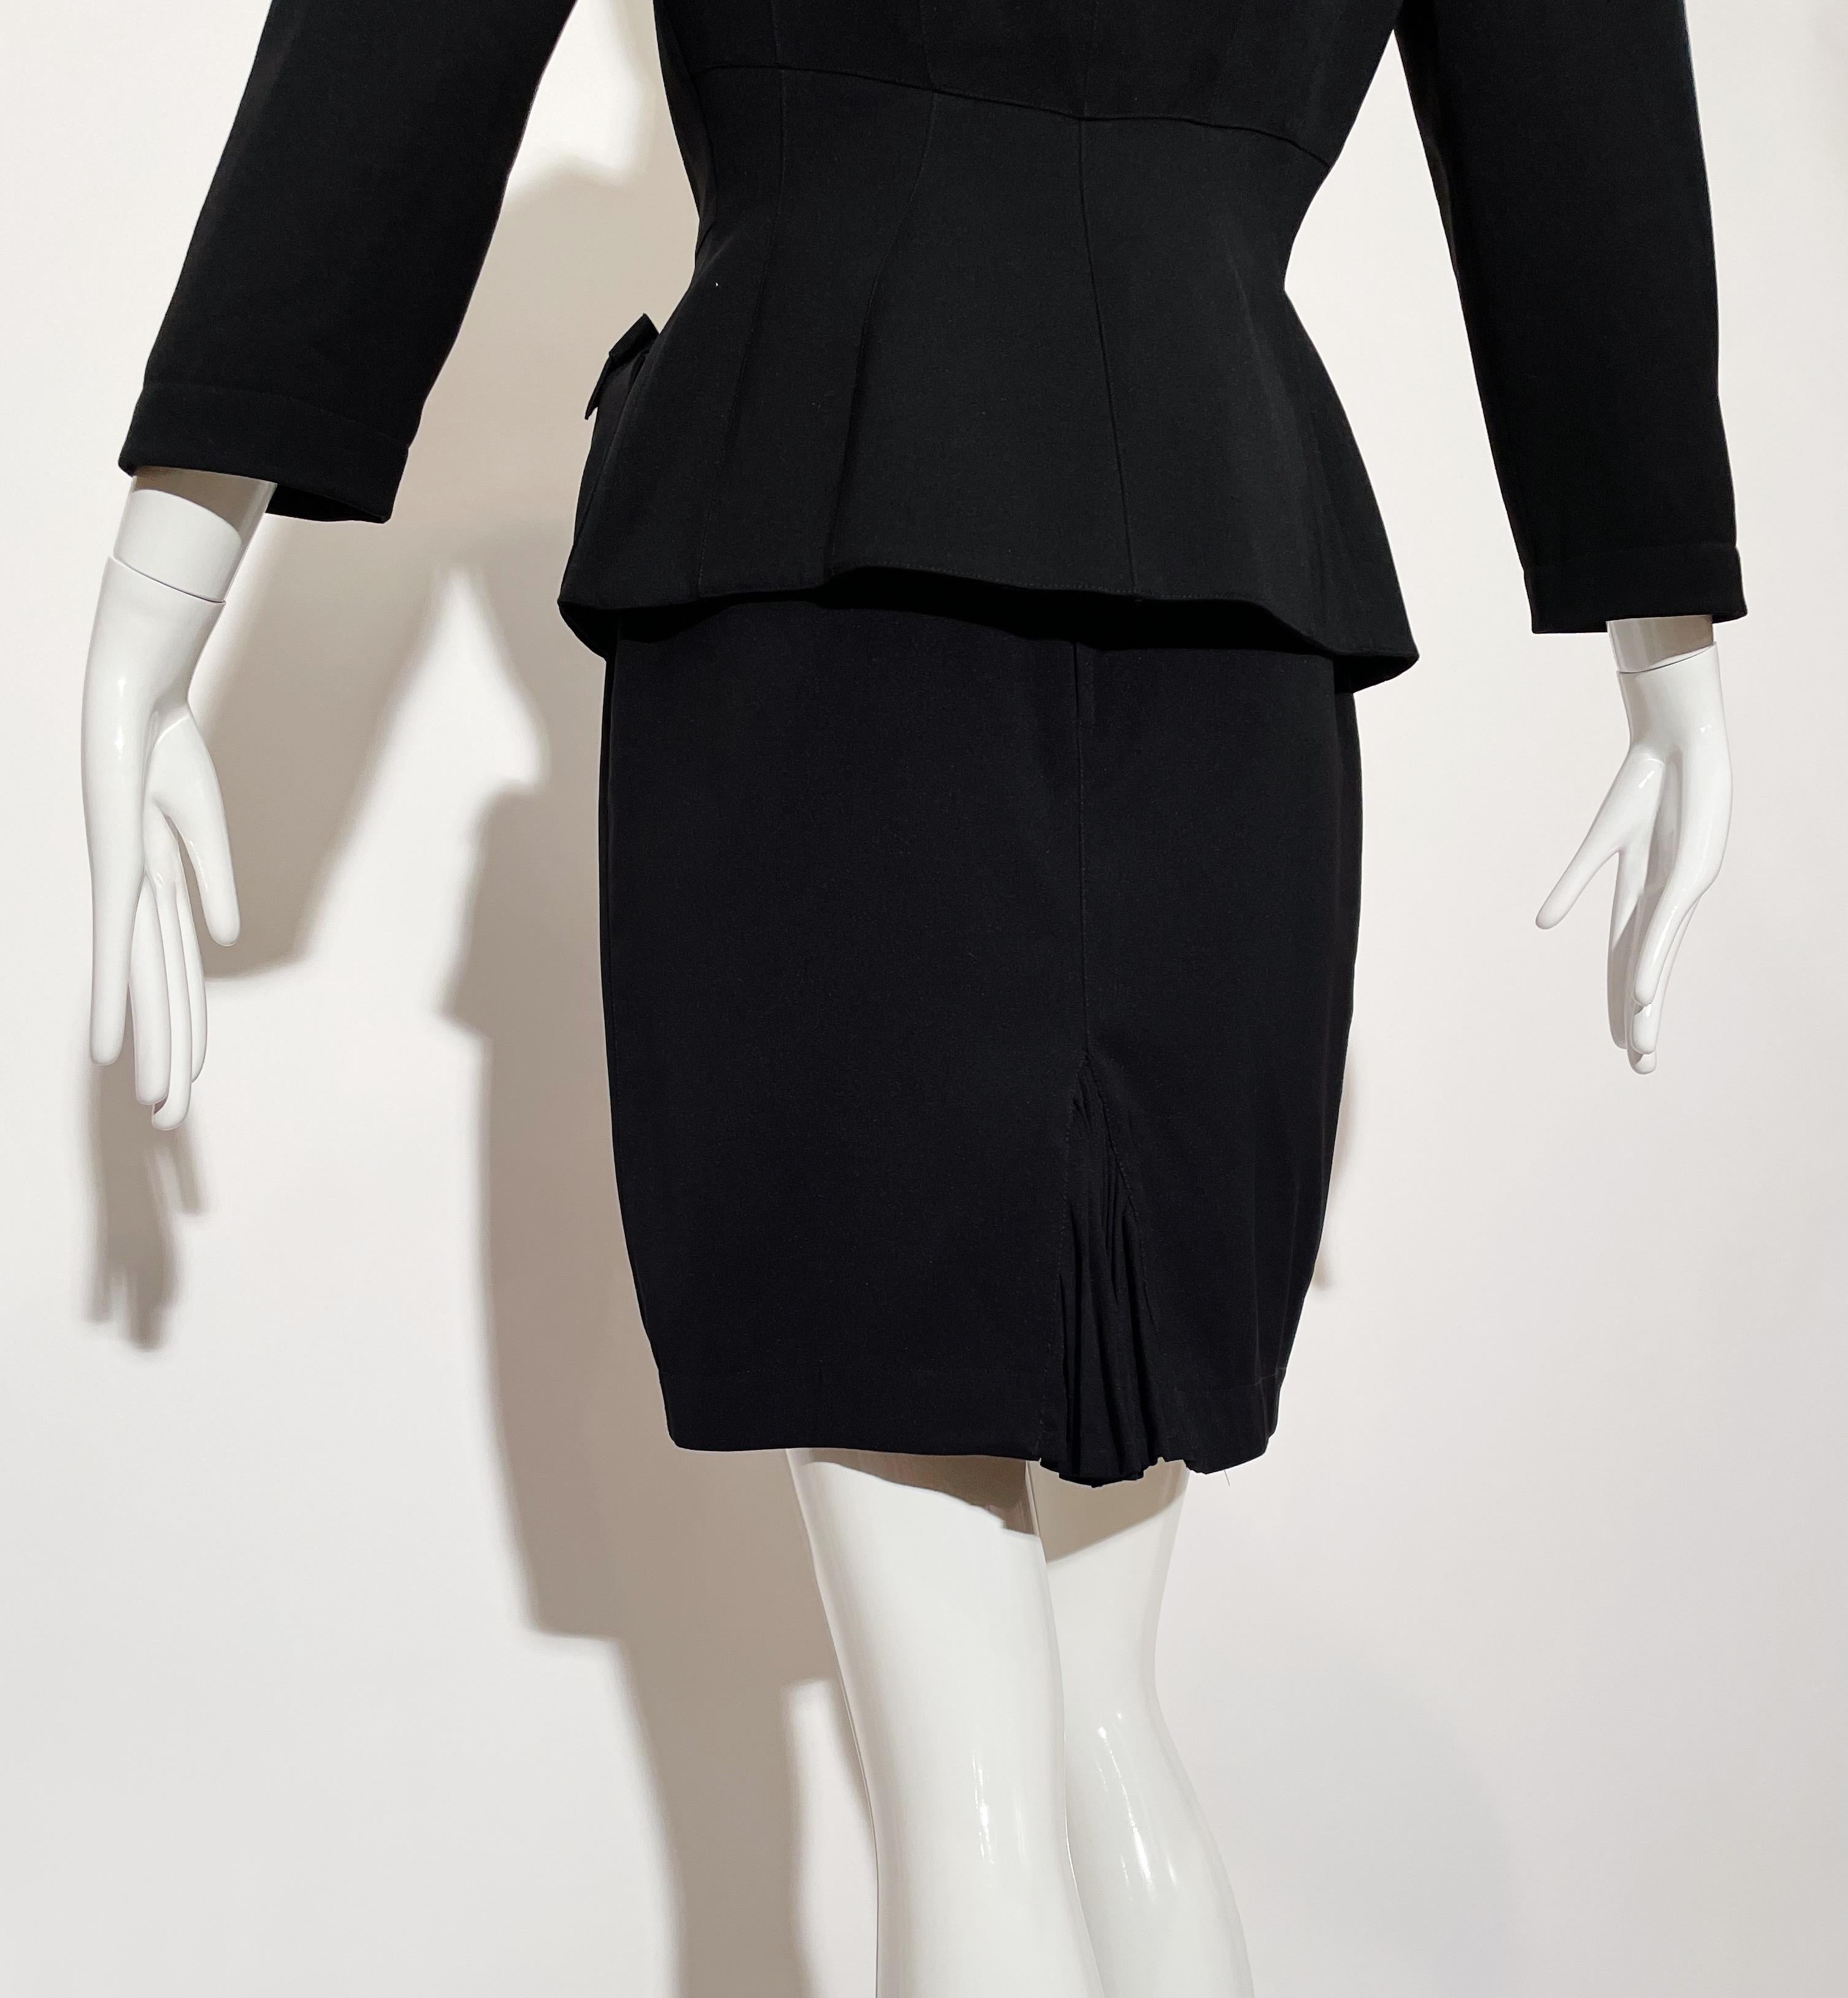 Thierry Mugler Black Bow Skirt Suit  For Sale 2